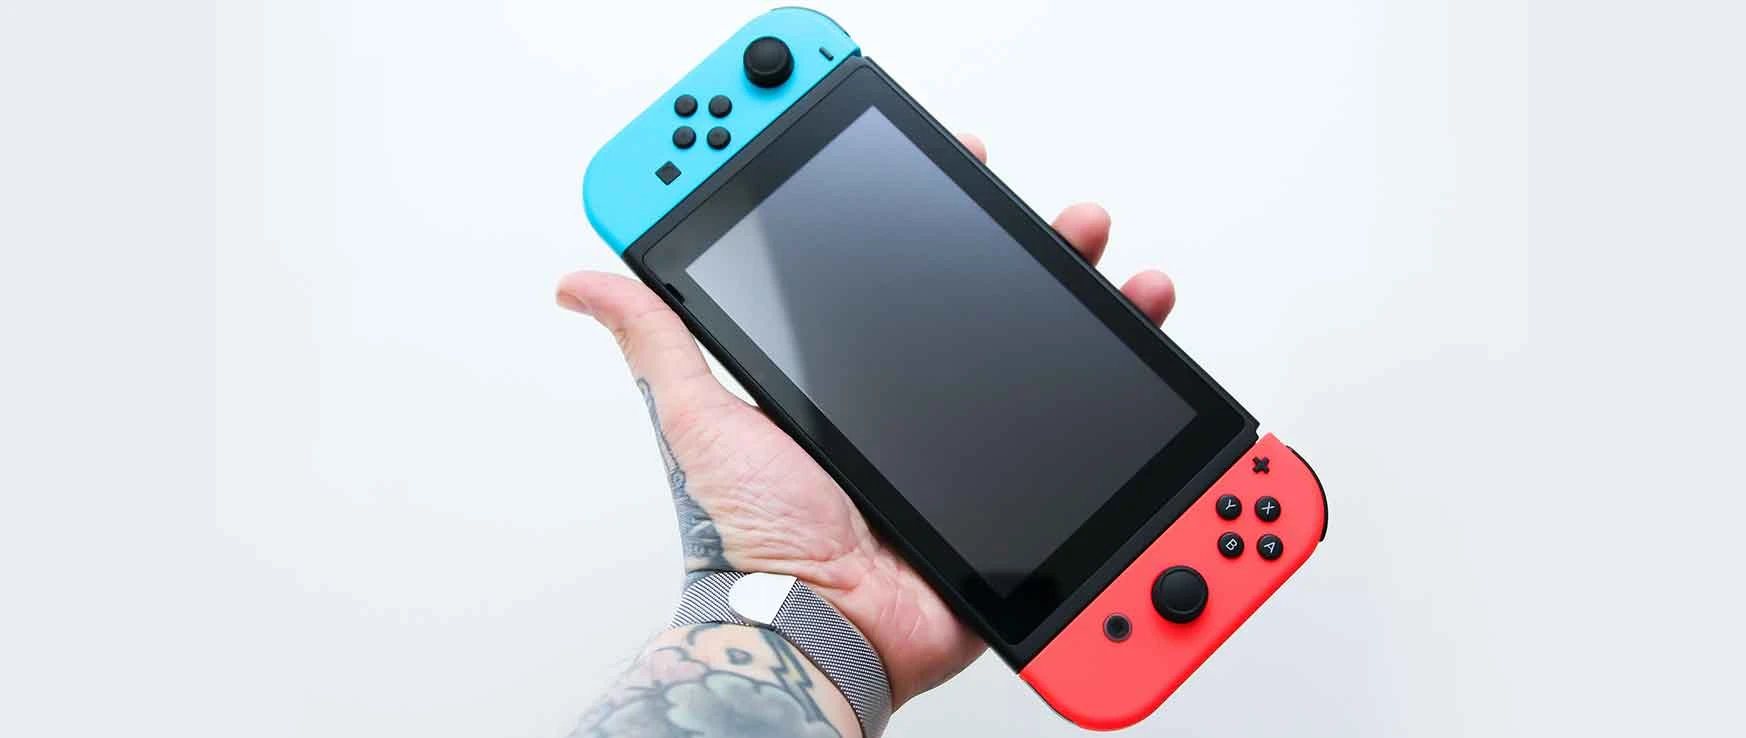 Turn Any Android Phone Into a Nintendo Switch!